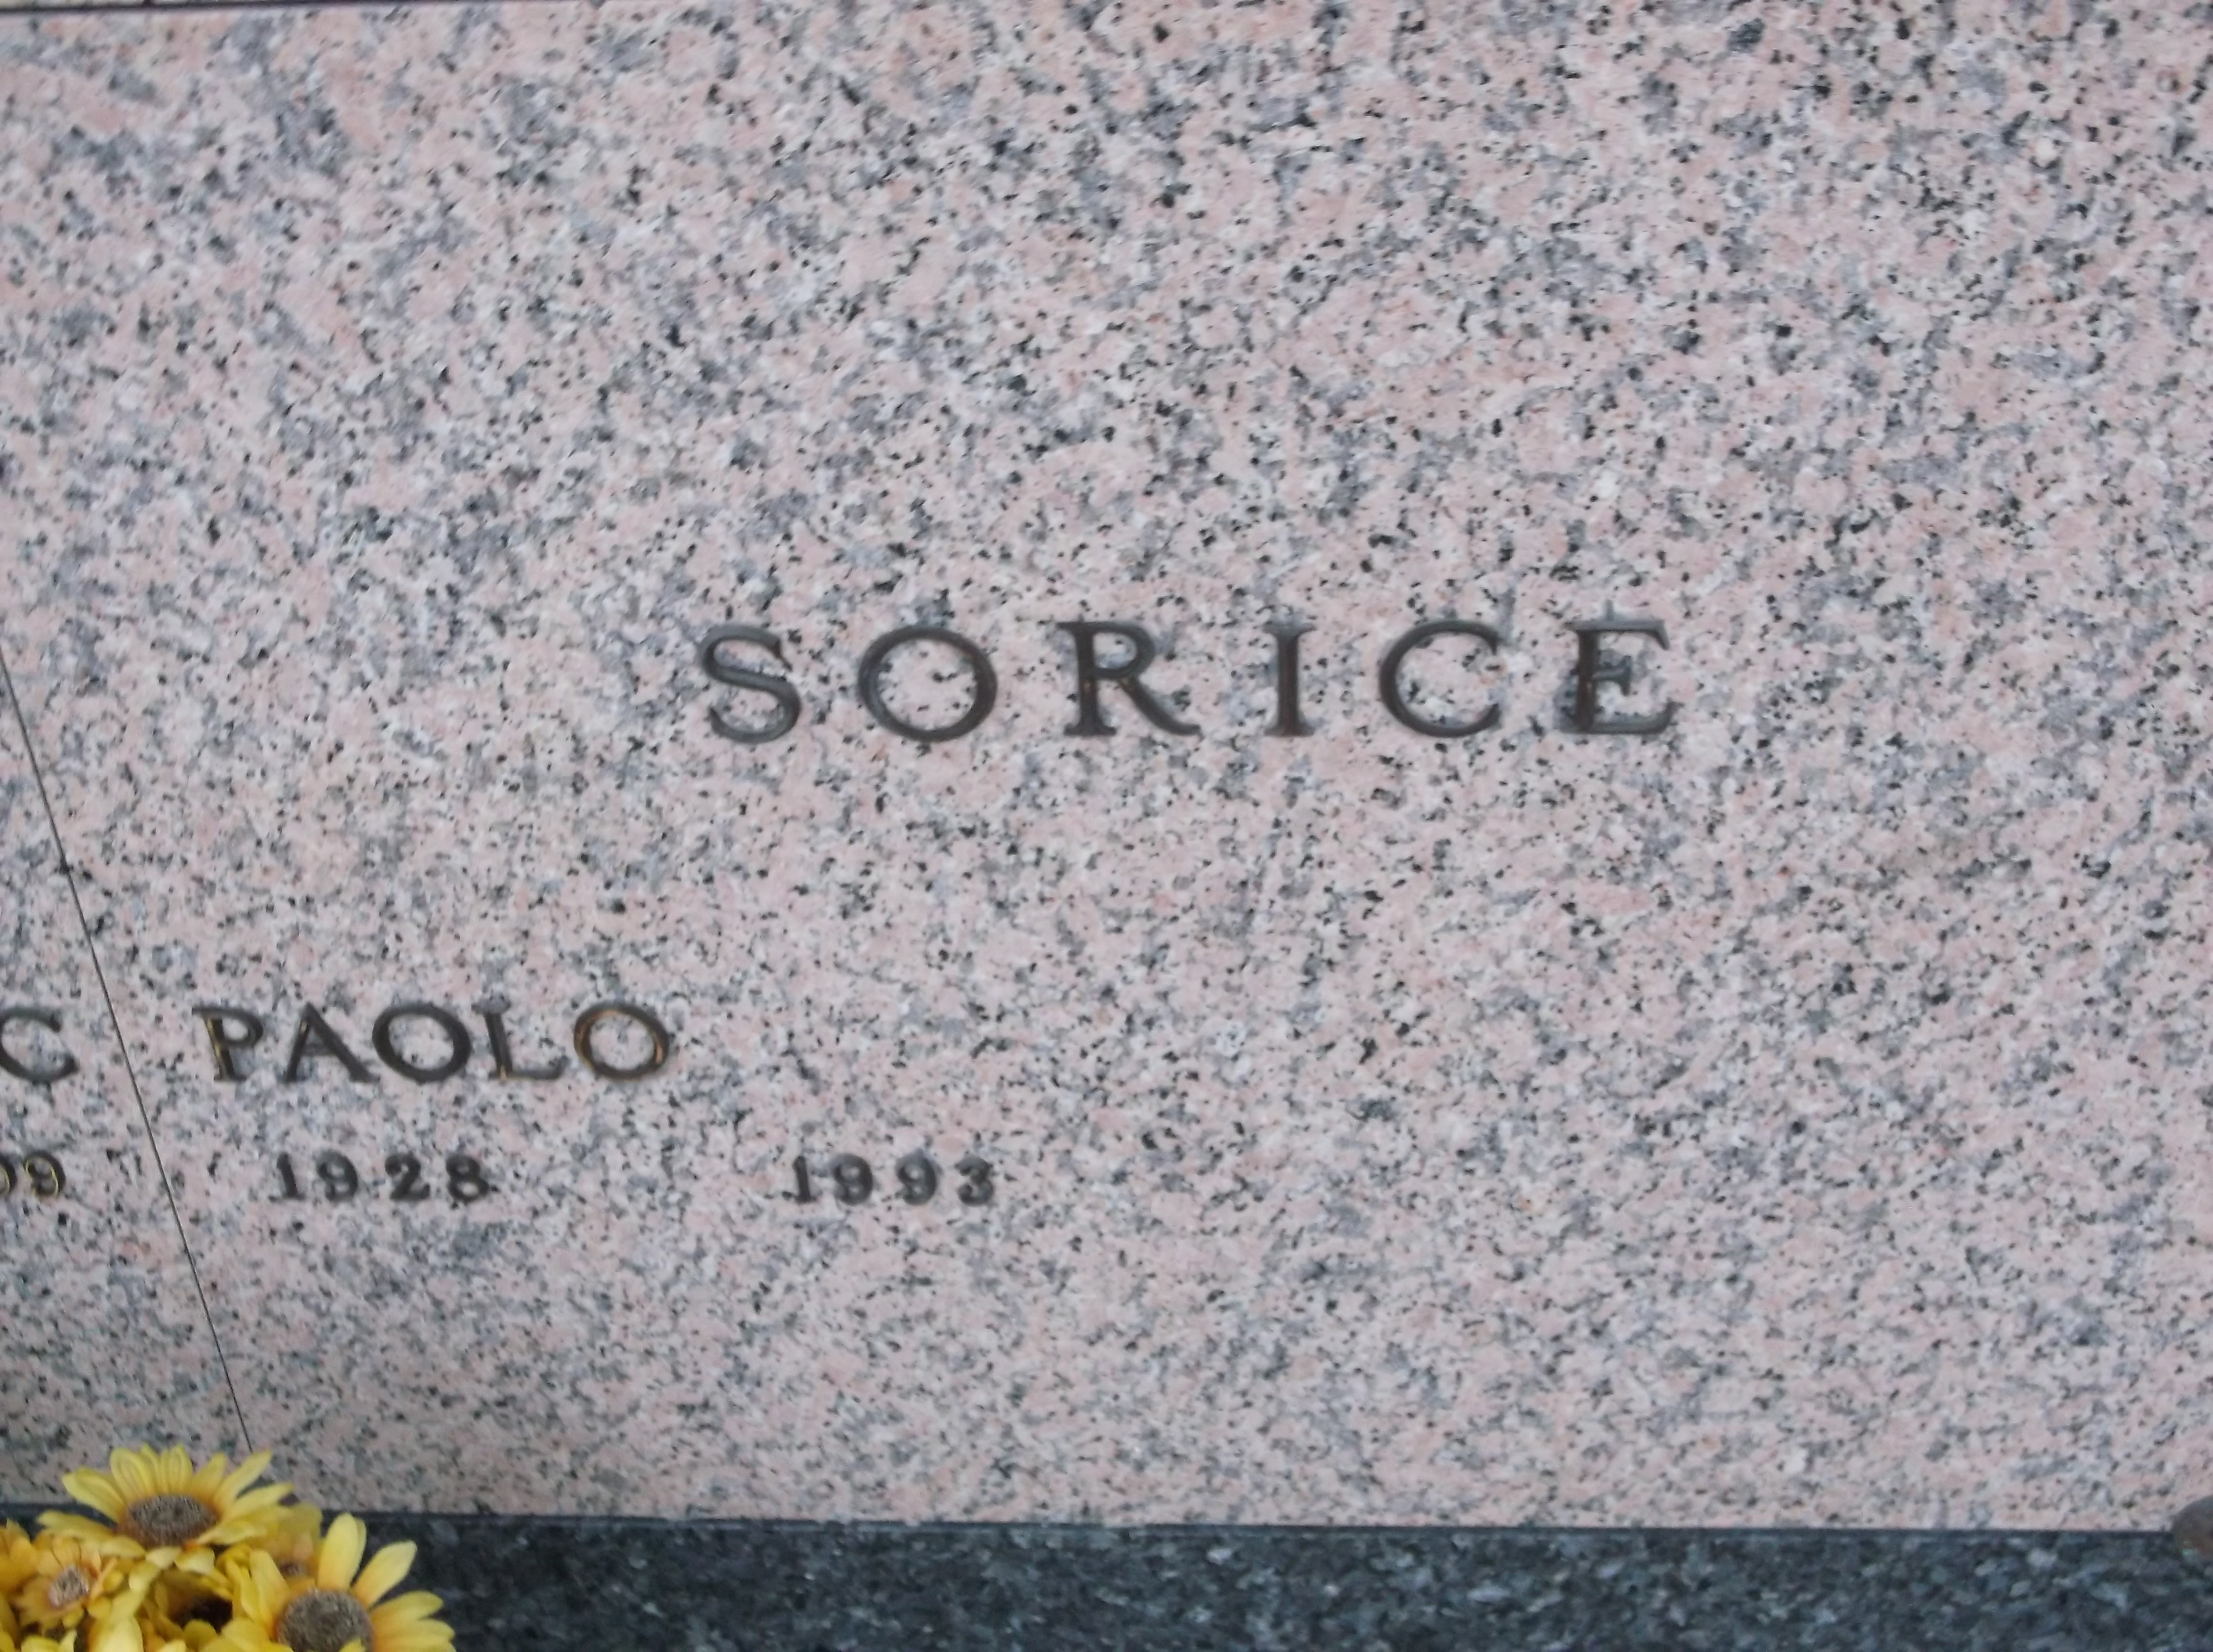 Paolo Sorice